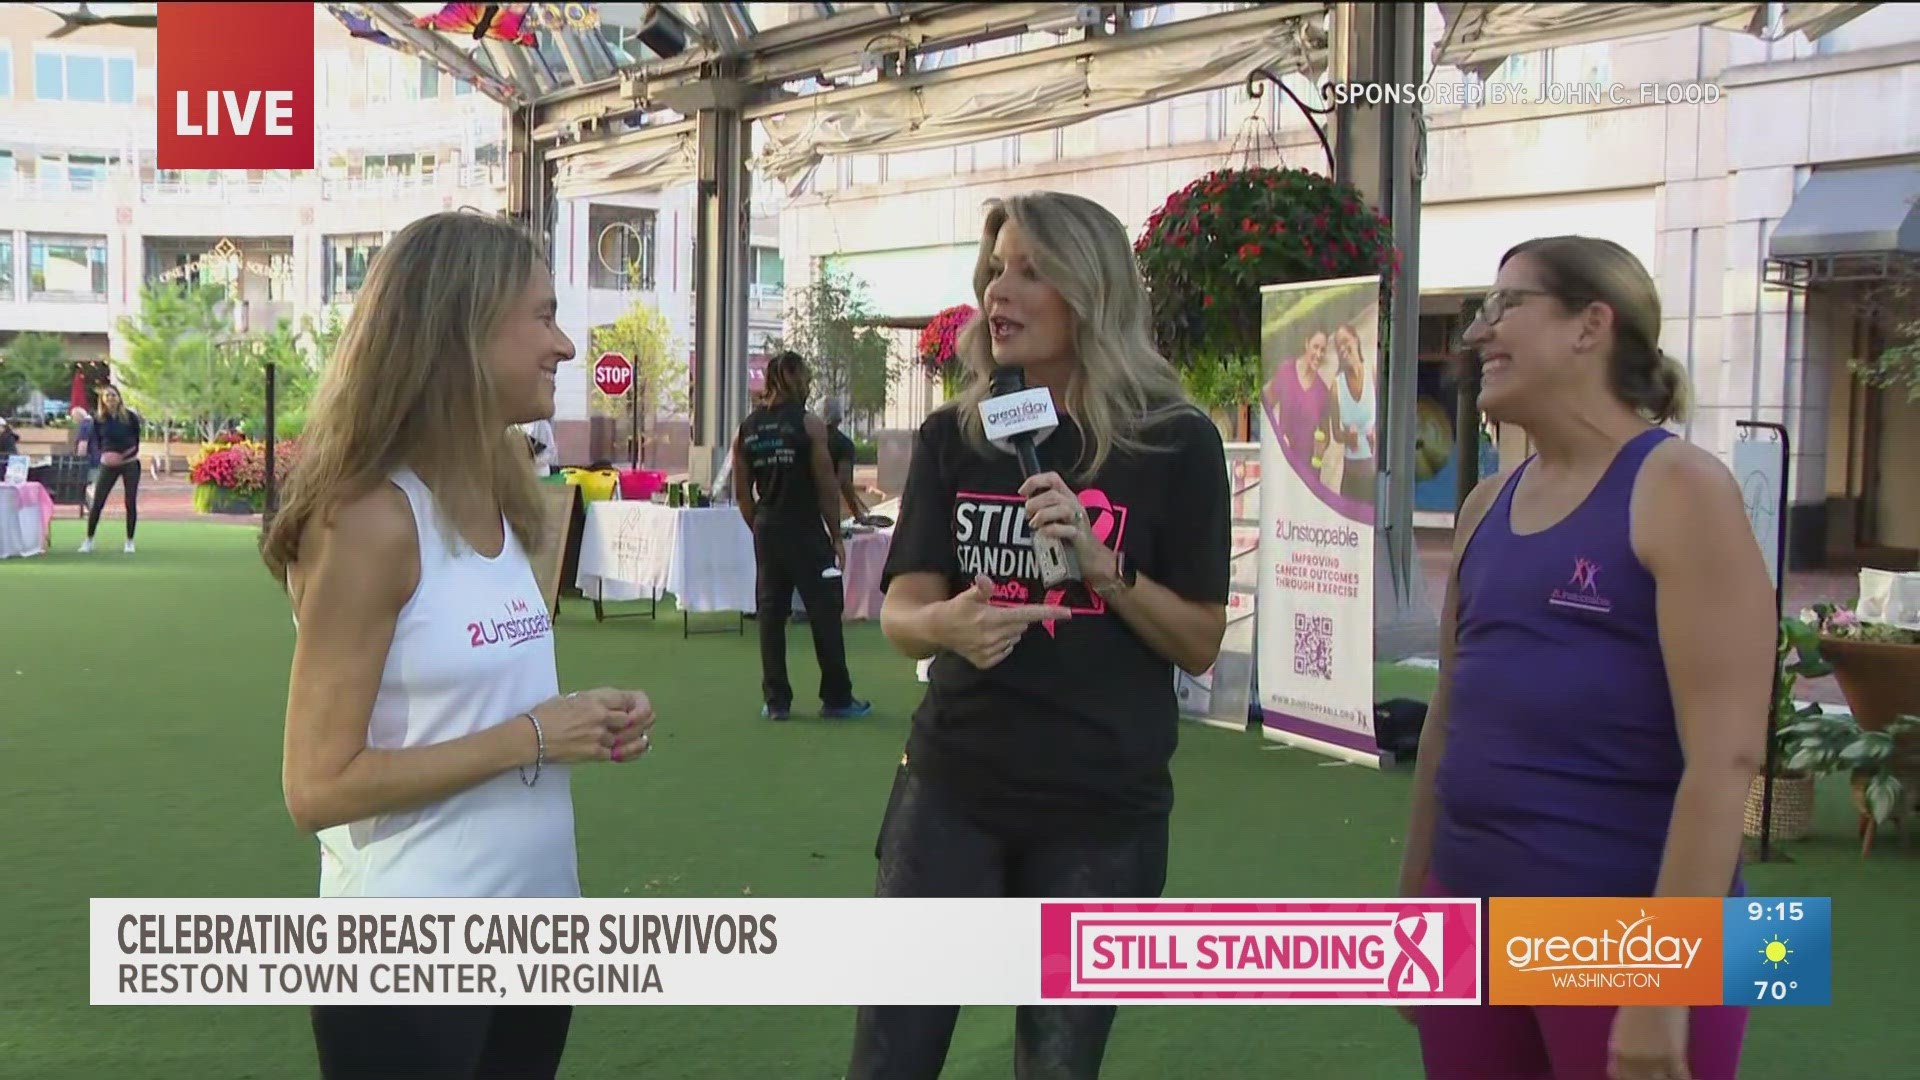 WUSA9 kicks off the Still Standing event with members from 2Unstoppable who promote encouragement for breast cancer survivors through exercise and engagement.